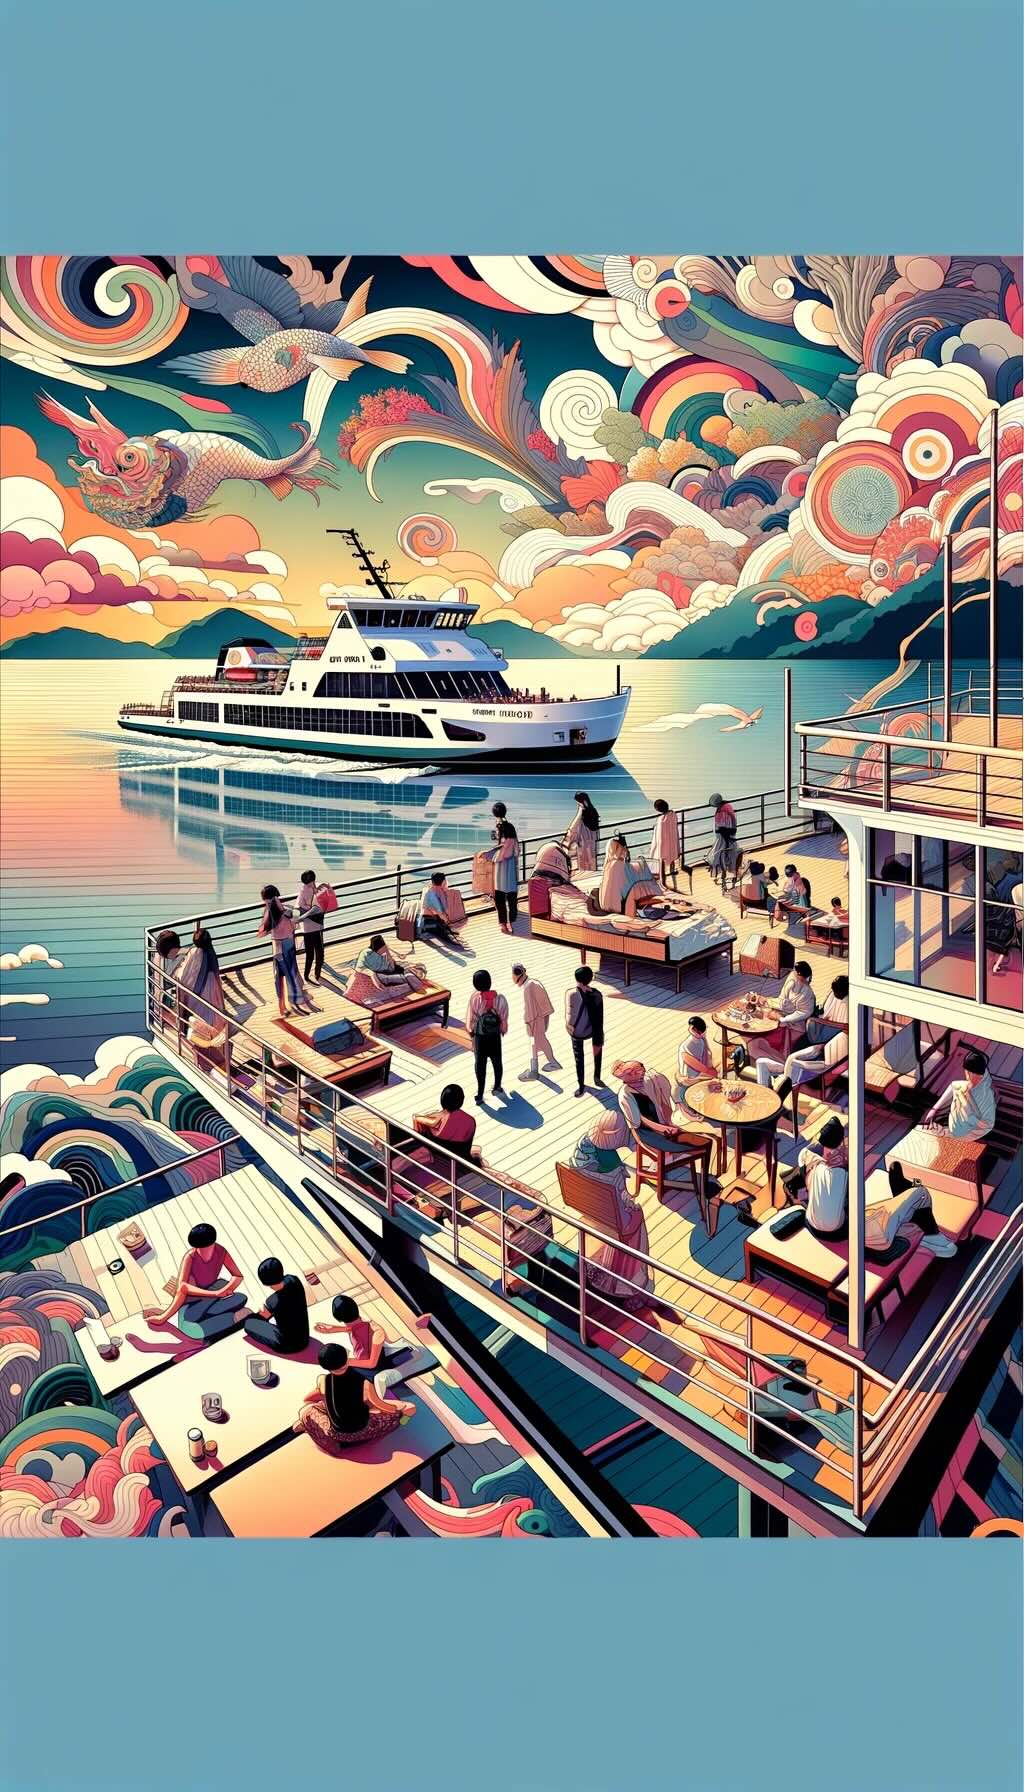 Essence of a ferry journey in Japan, depicting travelers engaging in various aspects of the experience. It showcases moments of enjoyment such as admiring scenic views from the deck, using onboard amenities like lounges and onsens, participating in cultural activities, and social interactions. Additionally, it conveys preparedness for unforeseen circumstances, with visual cues like travelers consulting smartphones for updates, discussing alternate plans, and carrying essentials for comfort. It captures the vibrant, abstract interpretation of the ferry journey's potential highs and lows, emphasizing a blend of adventure, cultural immersion, and pragmatic travel planning.